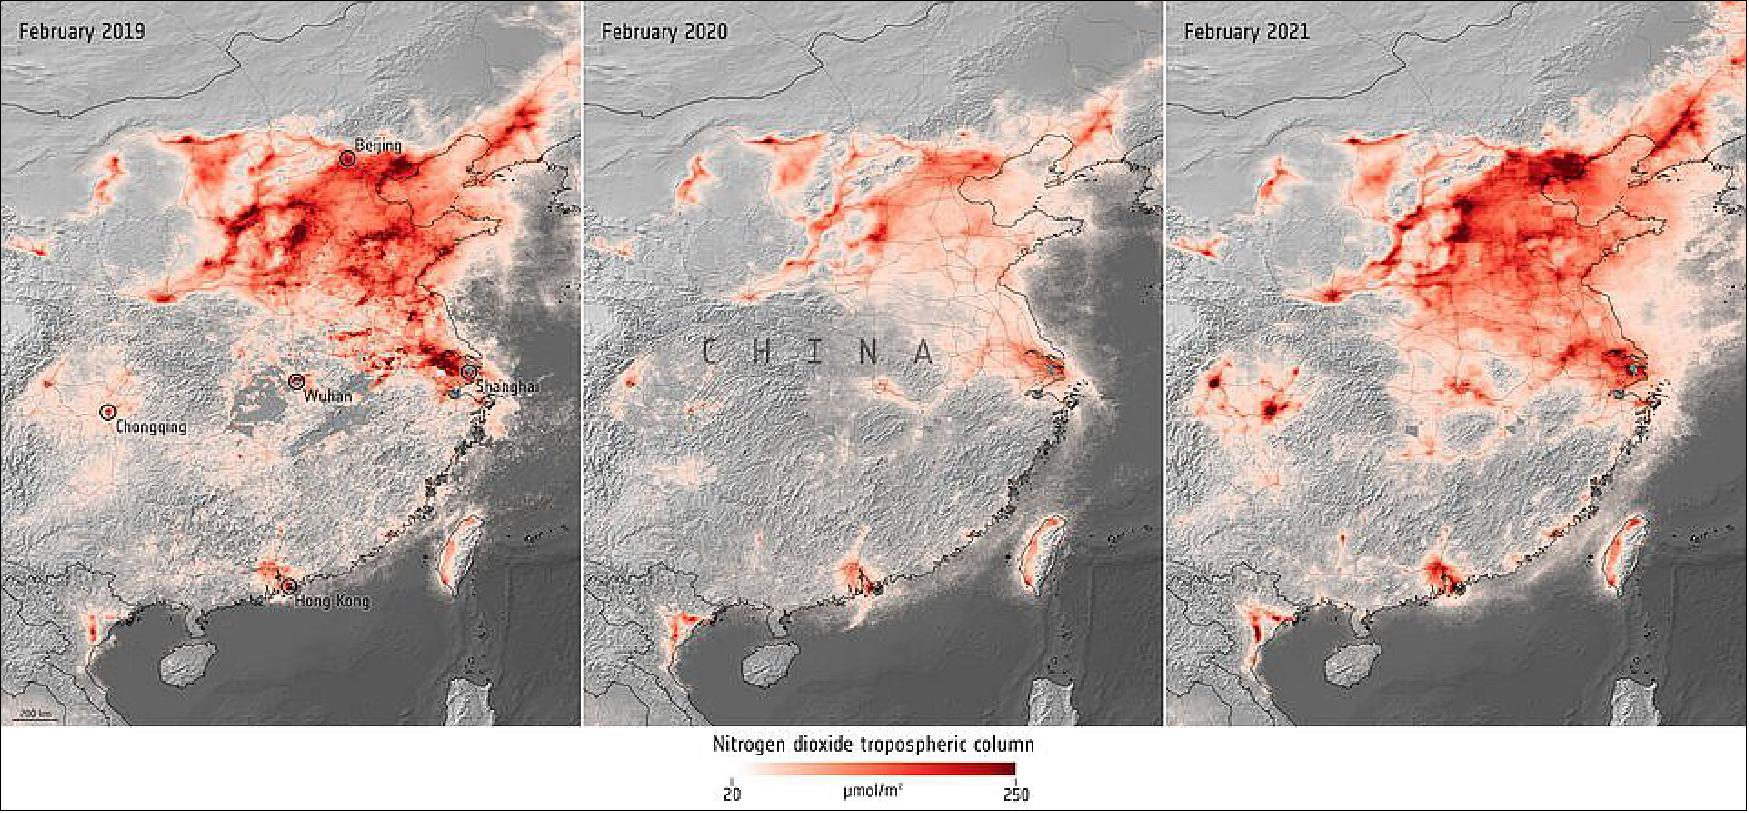 Figure 37: NO2 concentrations over China. These images, using data from the Copernicus Sentinel-5P satellite, show the monthly average NO2 concentrations over China in February 2019, February 2020 and February 2021 (image credit: ESA, the image contains modified Copernicus Sentinel data (2019-21), processed by ESA, CC BY-SA 3.0 IGO)